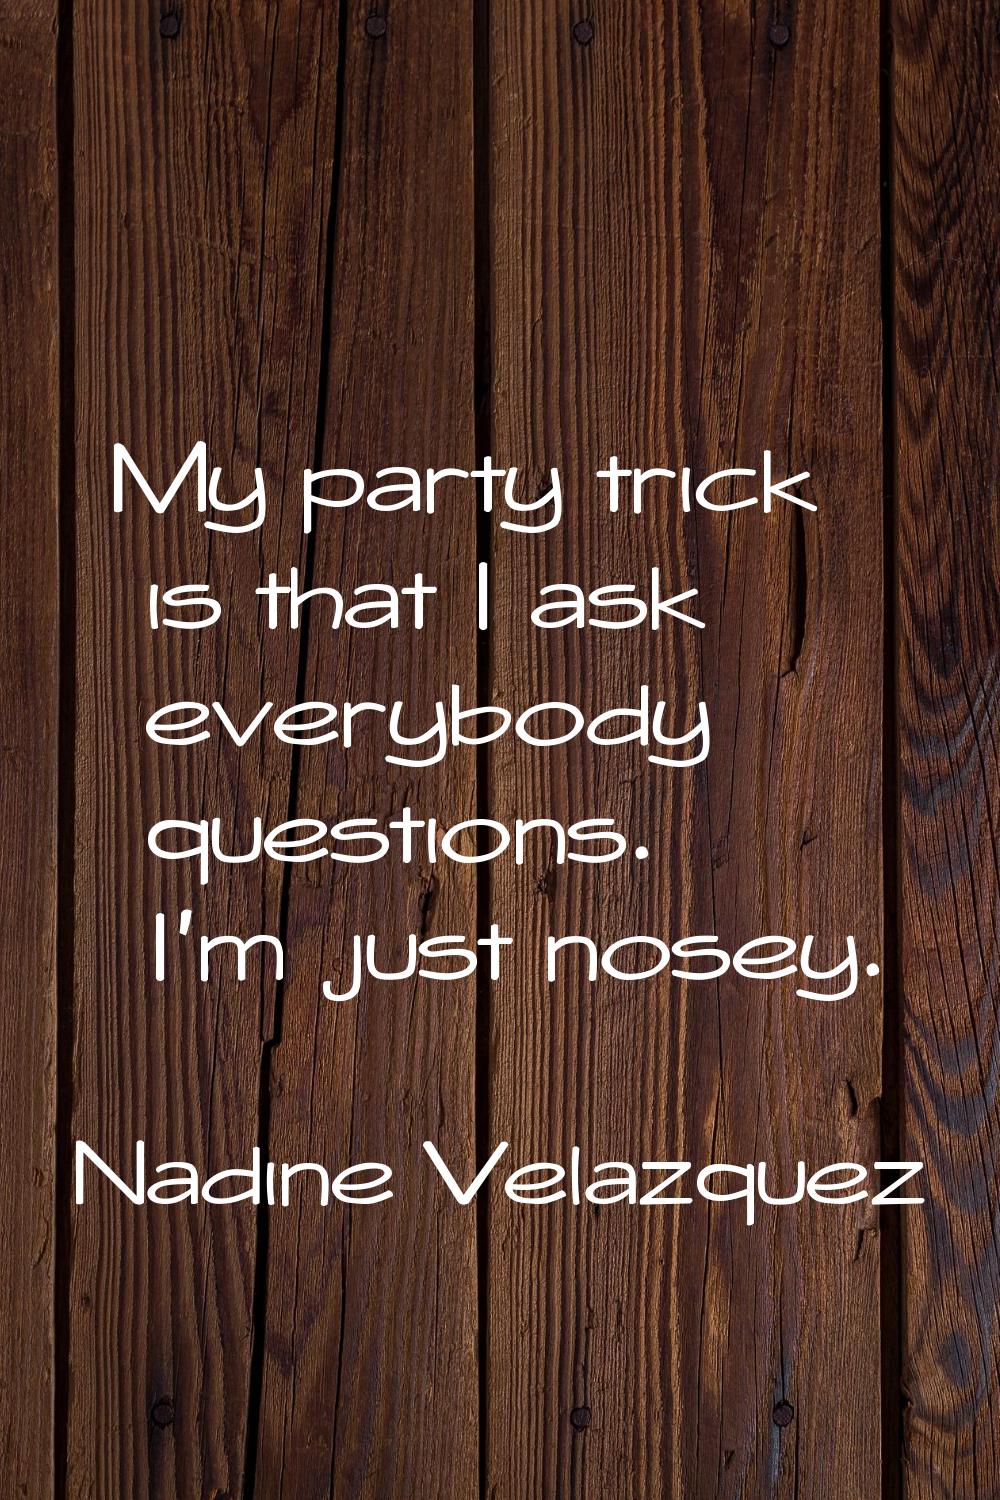 My party trick is that I ask everybody questions. I'm just nosey.